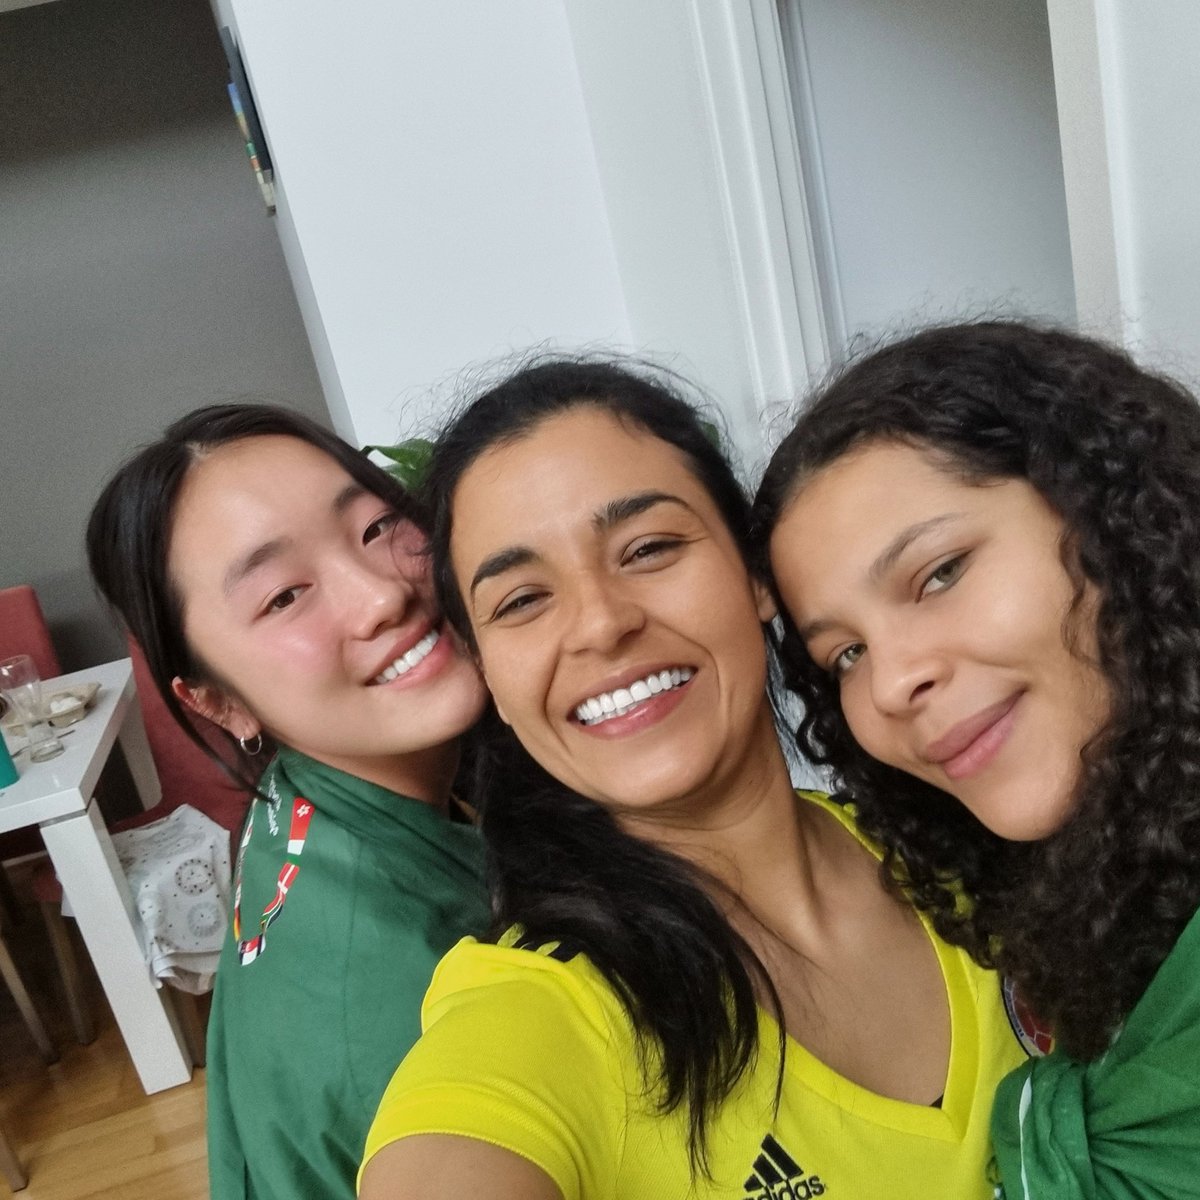 What a beautiful day with my #PhD sisters @JulianaViana26 and @Kobayashi1S perfect company to enjoy the ladies football final 👩🏾‍🔬 #CopaAmericaFemenina #CopaAmericaFemenina2022 🇨🇴🇧🇷 #WomenInSTEM #thisiswhatascientistlookslike